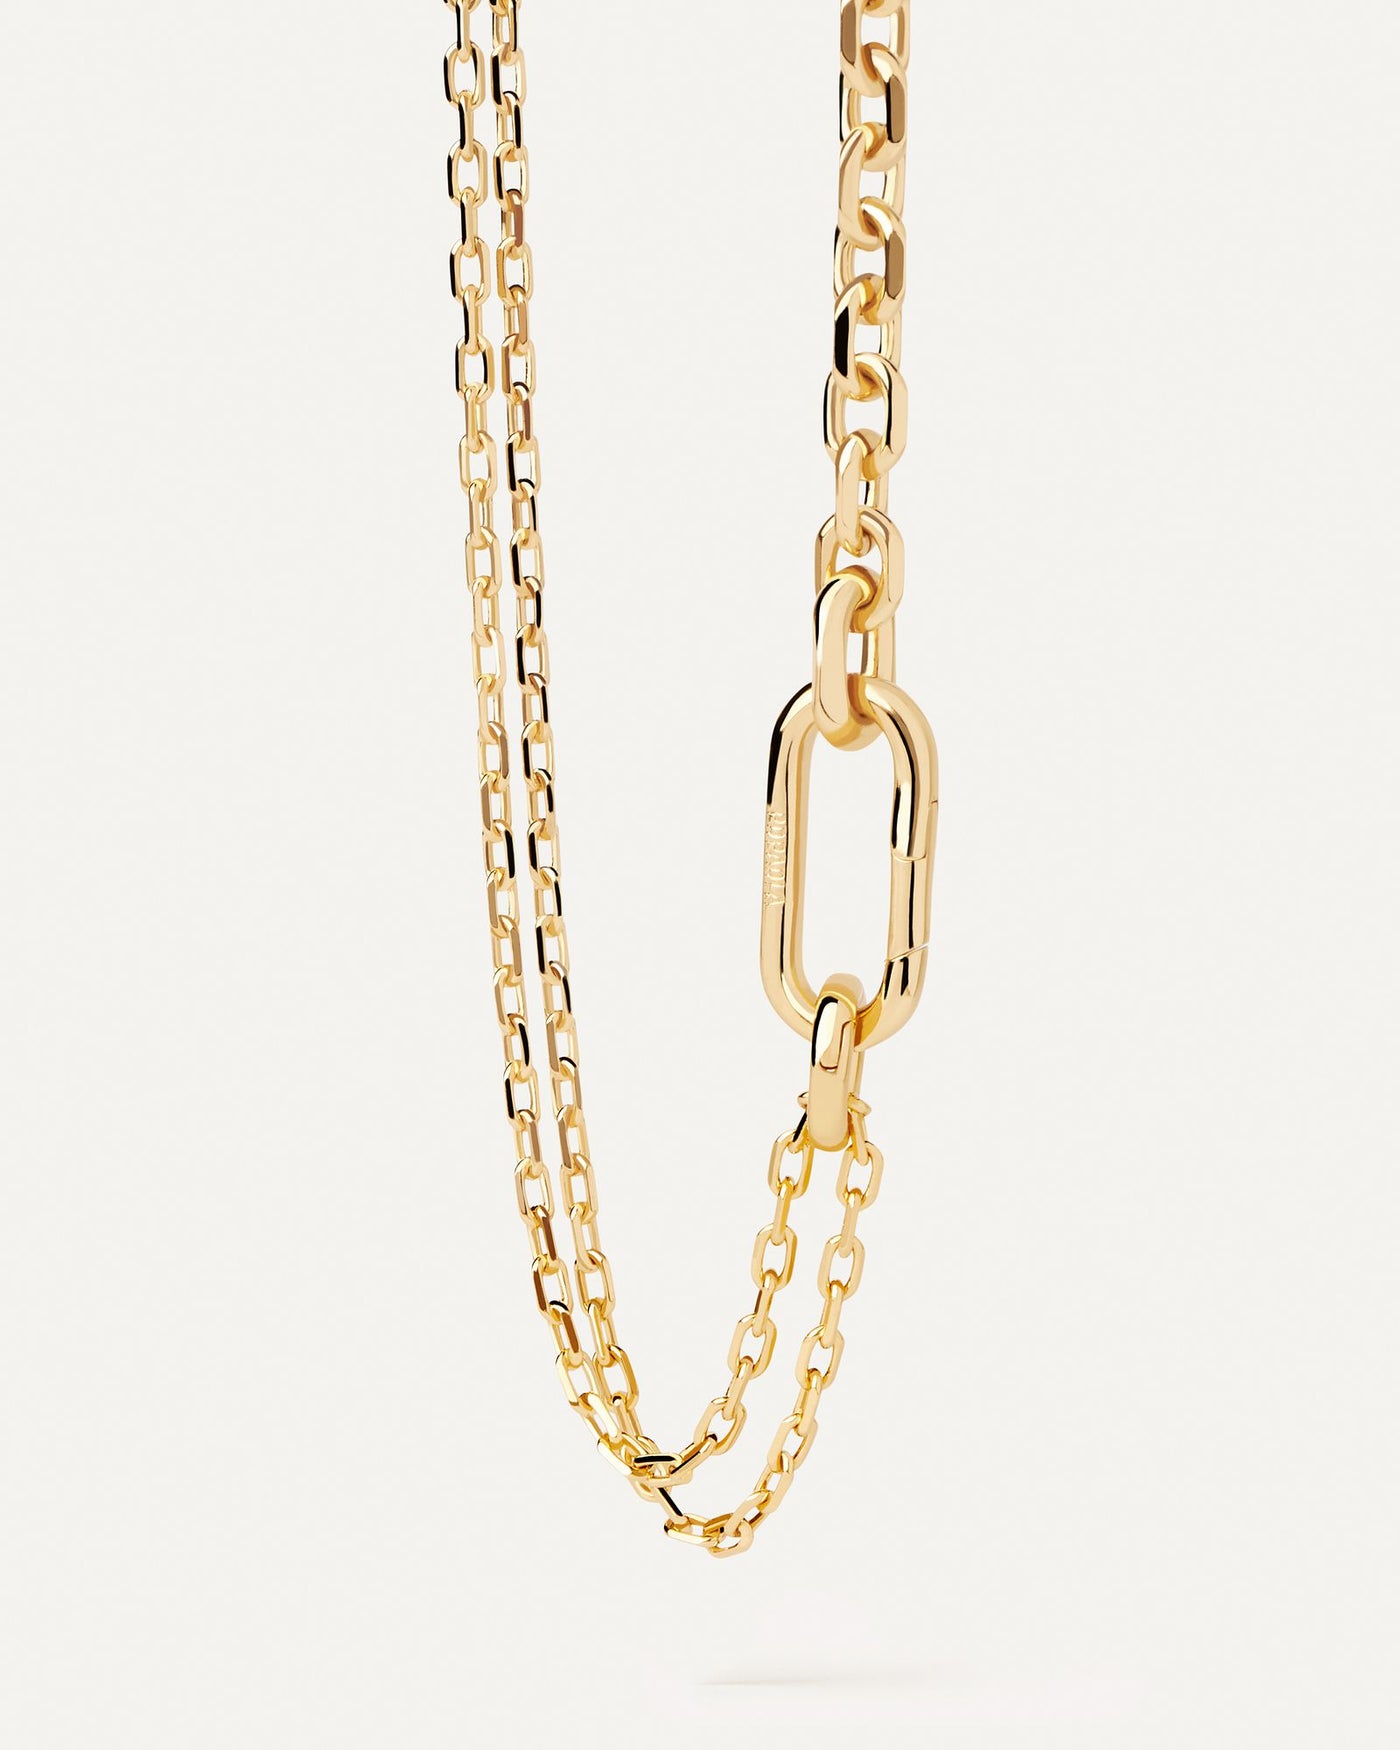 2024 Selection | Vesta Chain Necklace. Gold-plated double chain necklace with bold clasp and asymmetrical links. Get the latest arrival from PDPAOLA. Place your order safely and get this Best Seller. Free Shipping.